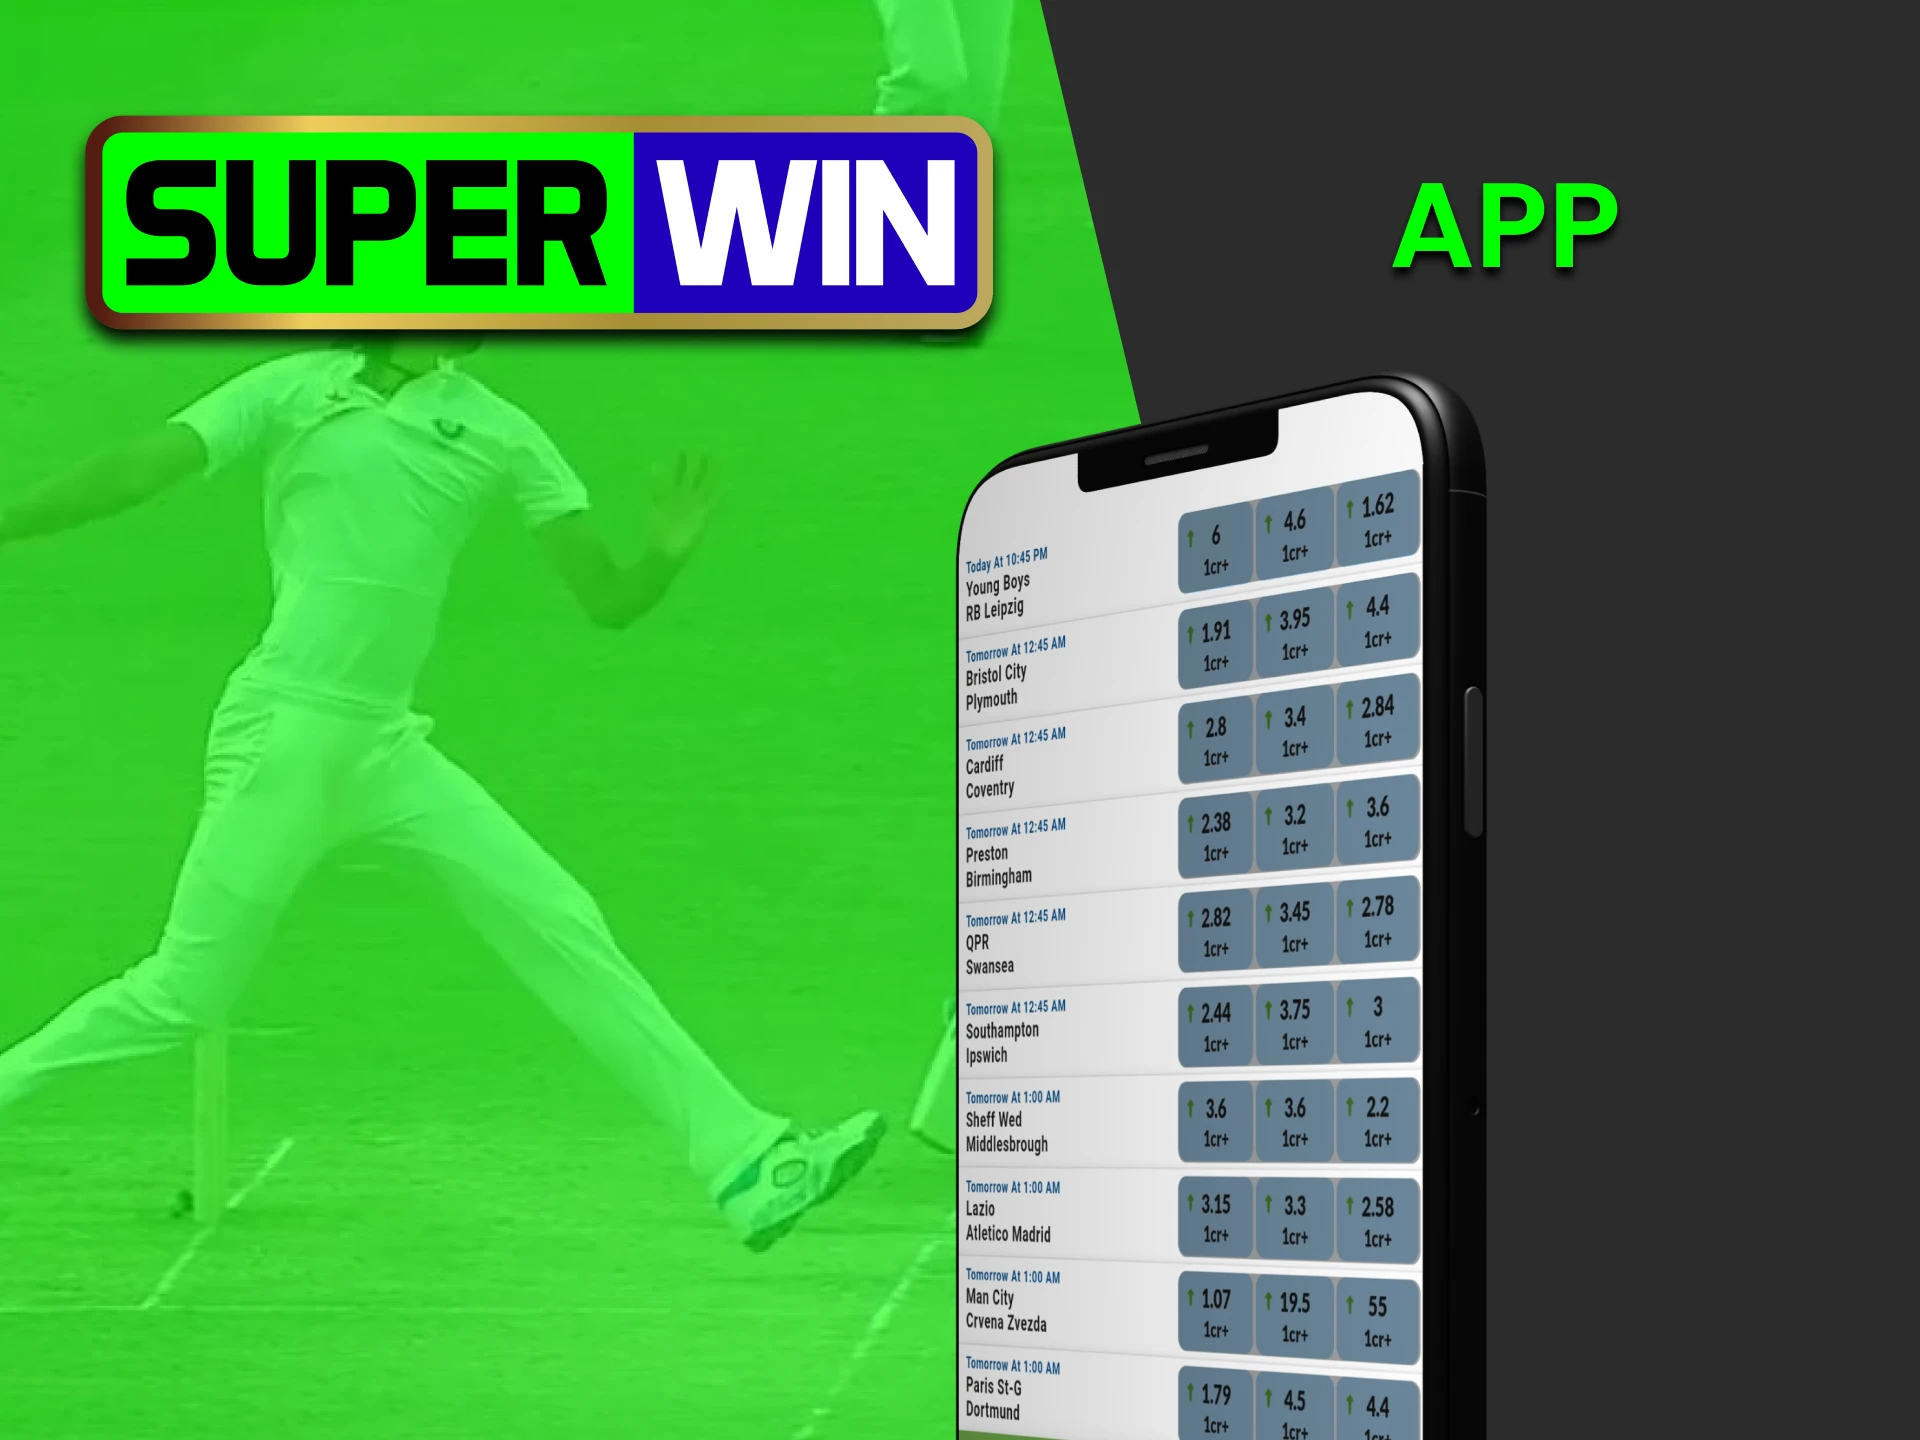 Download the Superwin app for sports betting.